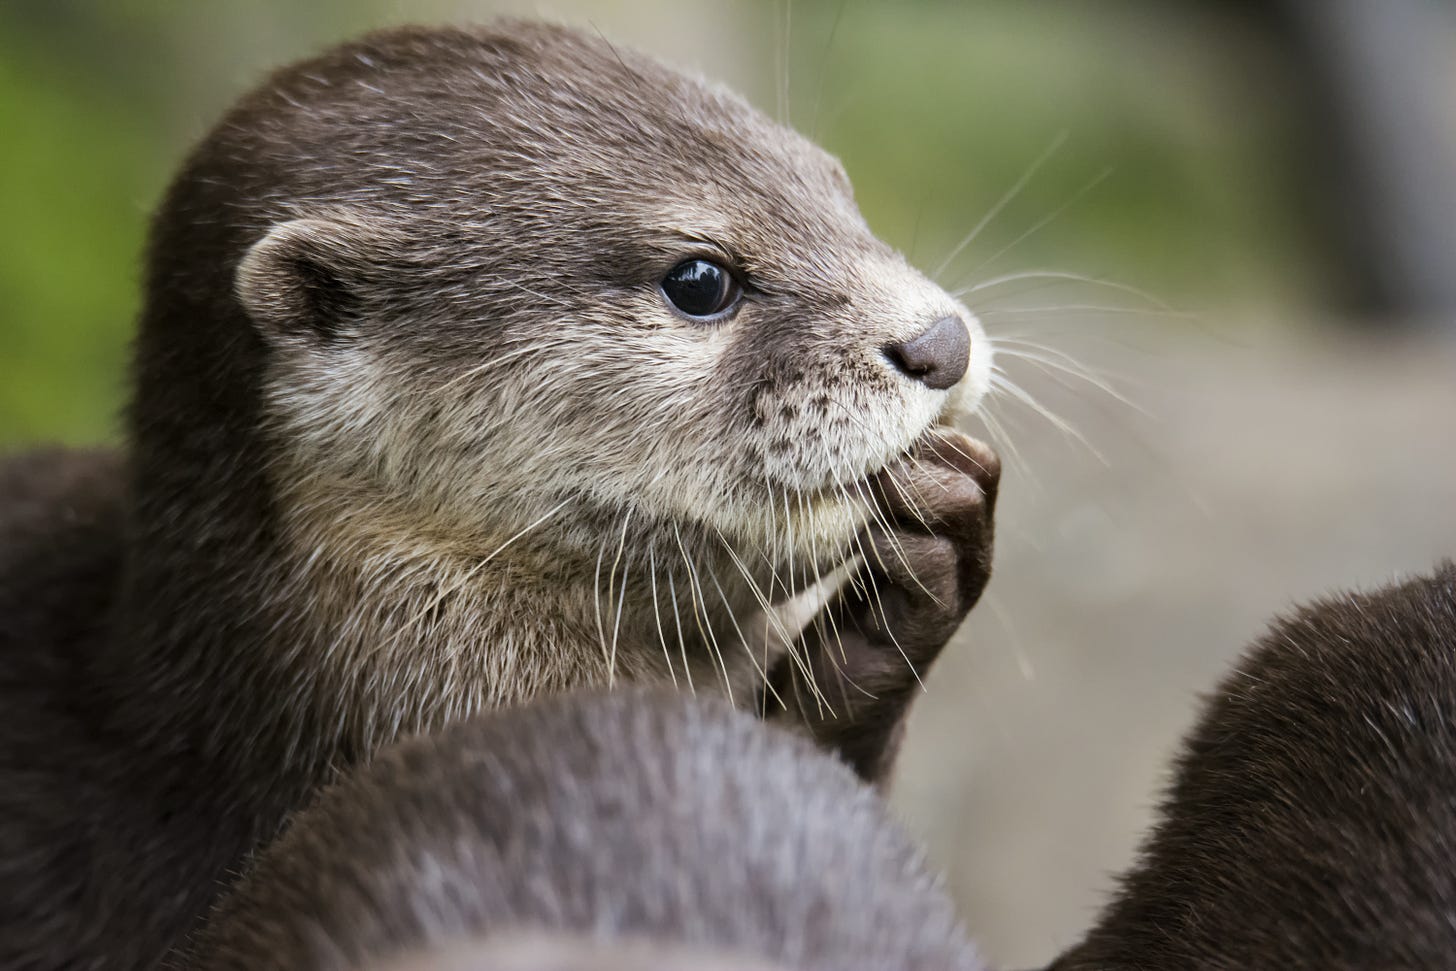 A photograph of a cute otter making a funny face. She has cute little otter paws and does not want you to get angry about NuGet packages.